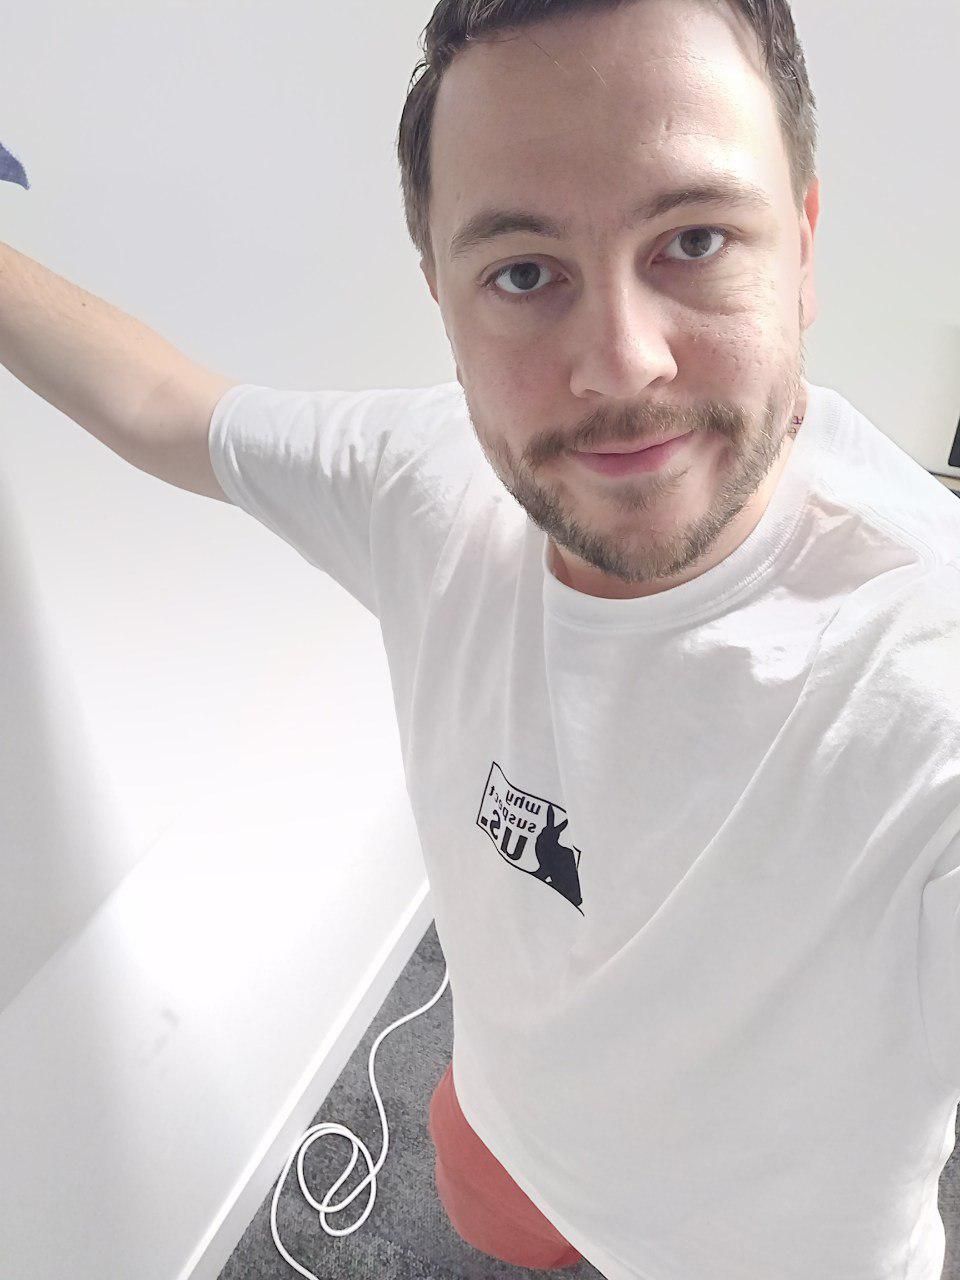 Kevin, wearing a white tshirt with the why suspect us branding